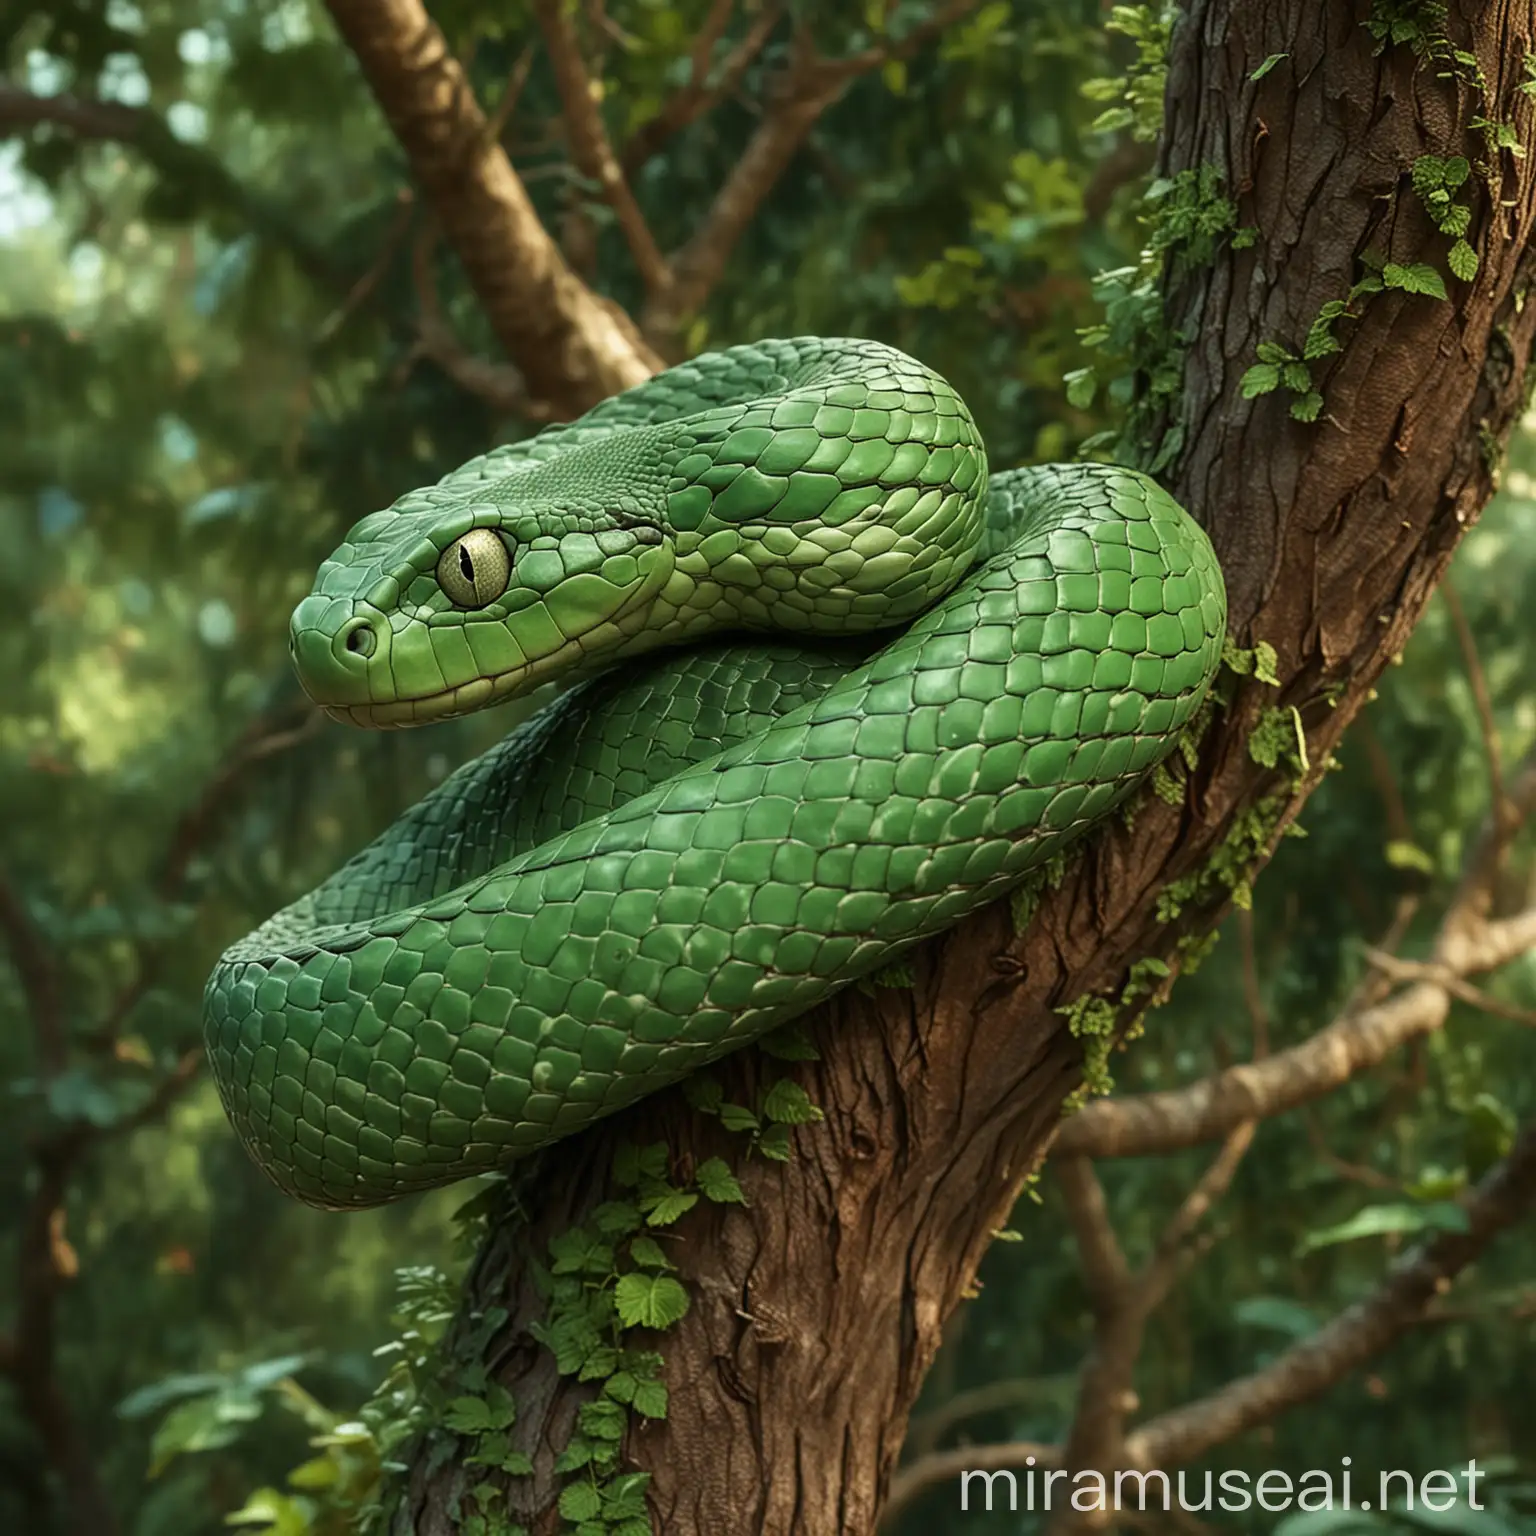 A green snake is coiled at the top of the tree，disney pixar style